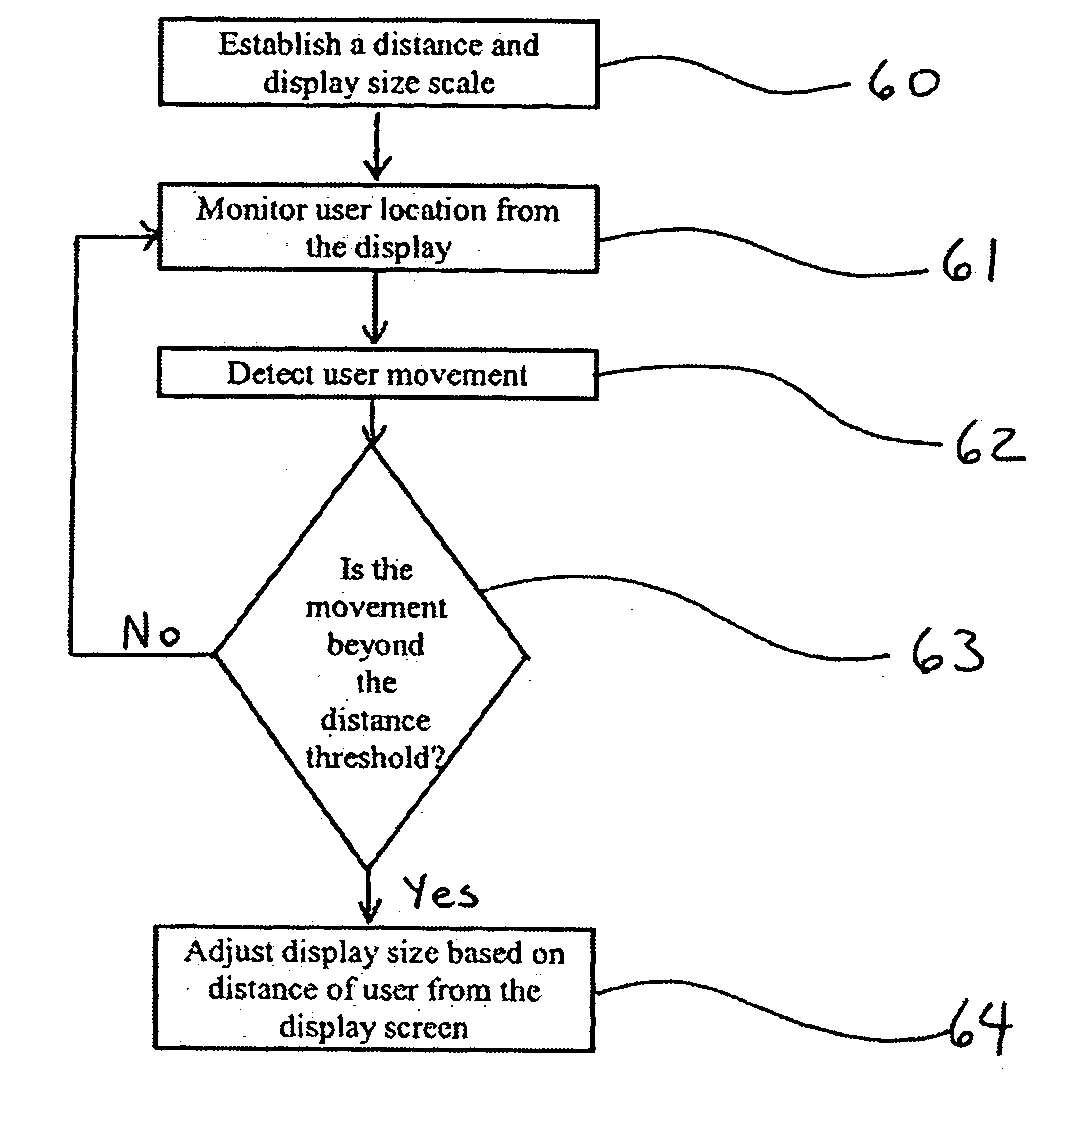 Method and system for adjusting a display based on user distance from display device